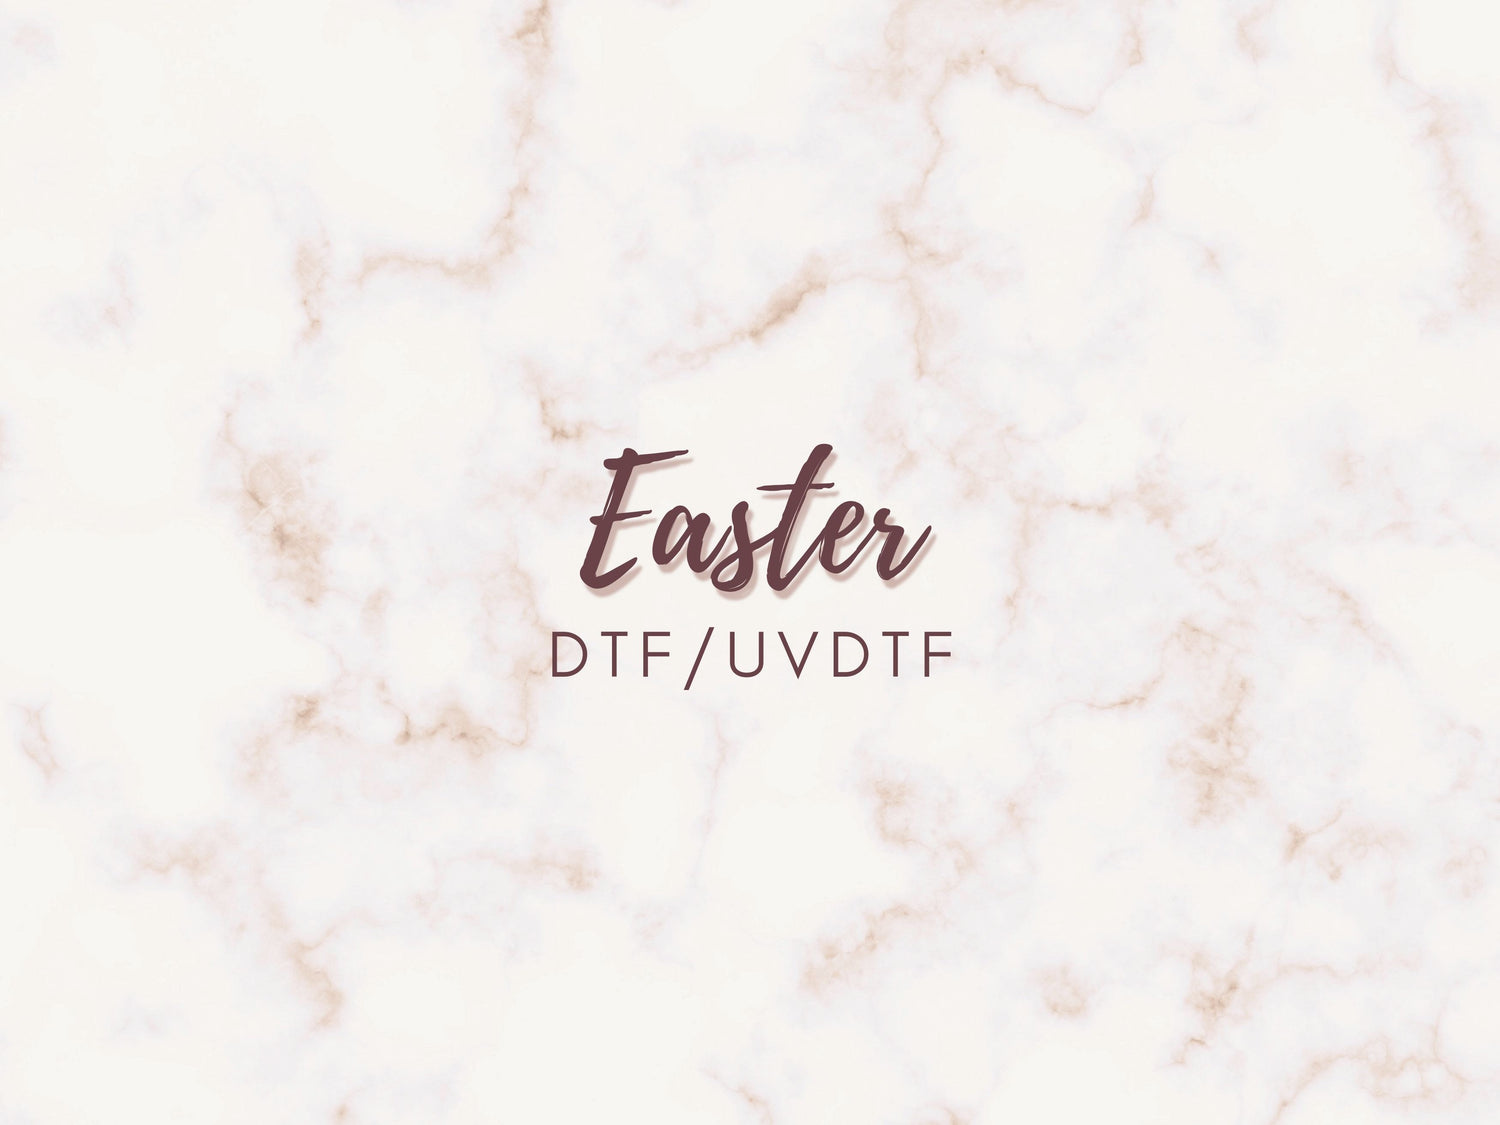 Easter inspired DTF Transfers and UVDTF Decals or Wraps